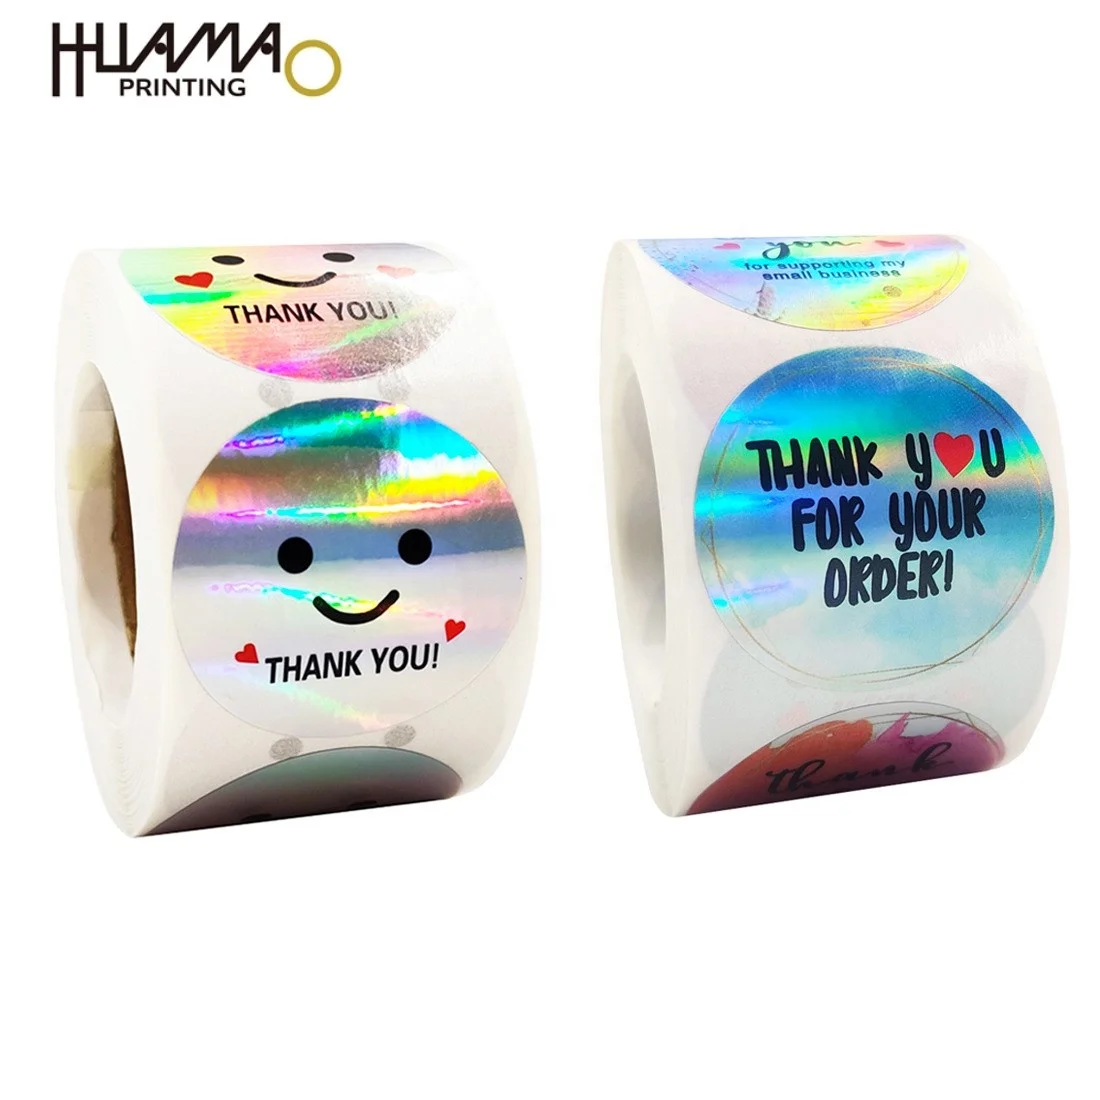 Trending Products Cosmetic Gift Packaging Box Carton Foil Balloon Kawaii Stickers 500Ml Bottle Packaging Box Thank You Stickers H2a687dc8d82f4f1791093e8054a6e586j